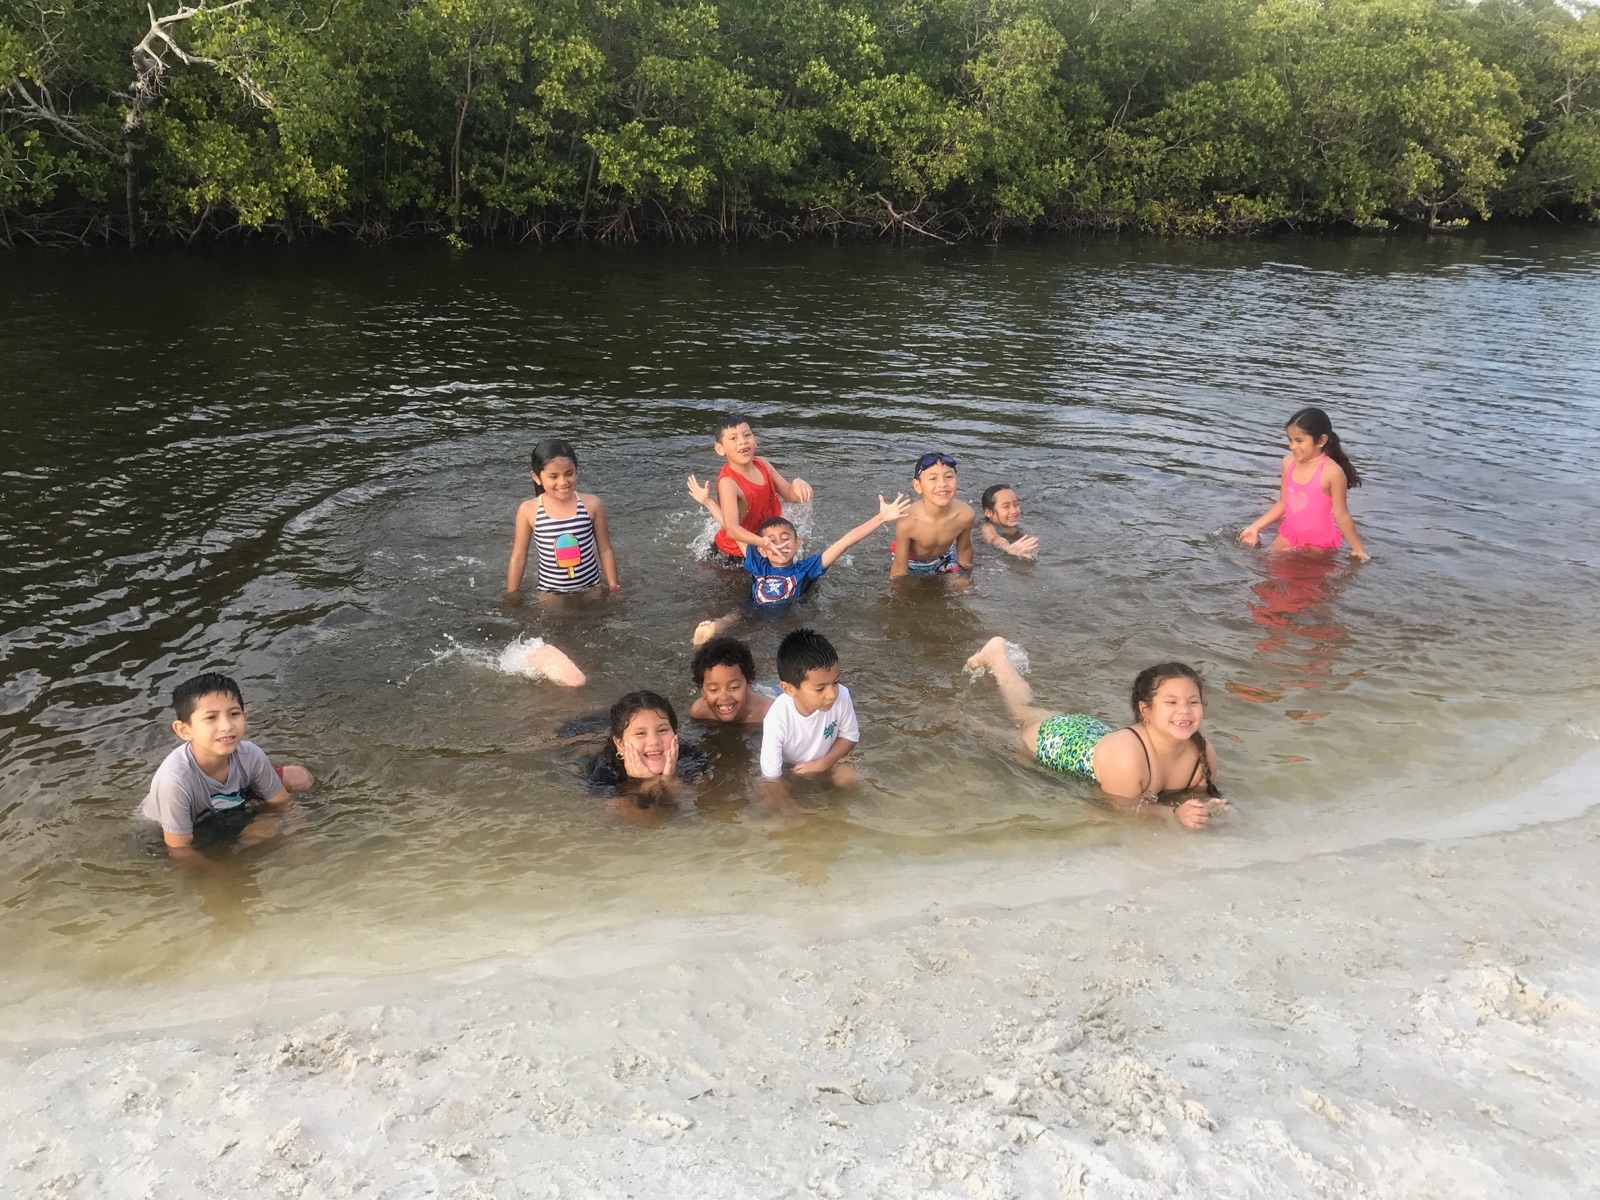 Students from the Heights Foundation enjoyed a scholarship-supported educational outing with Sanibel Sea School.&nbsp;